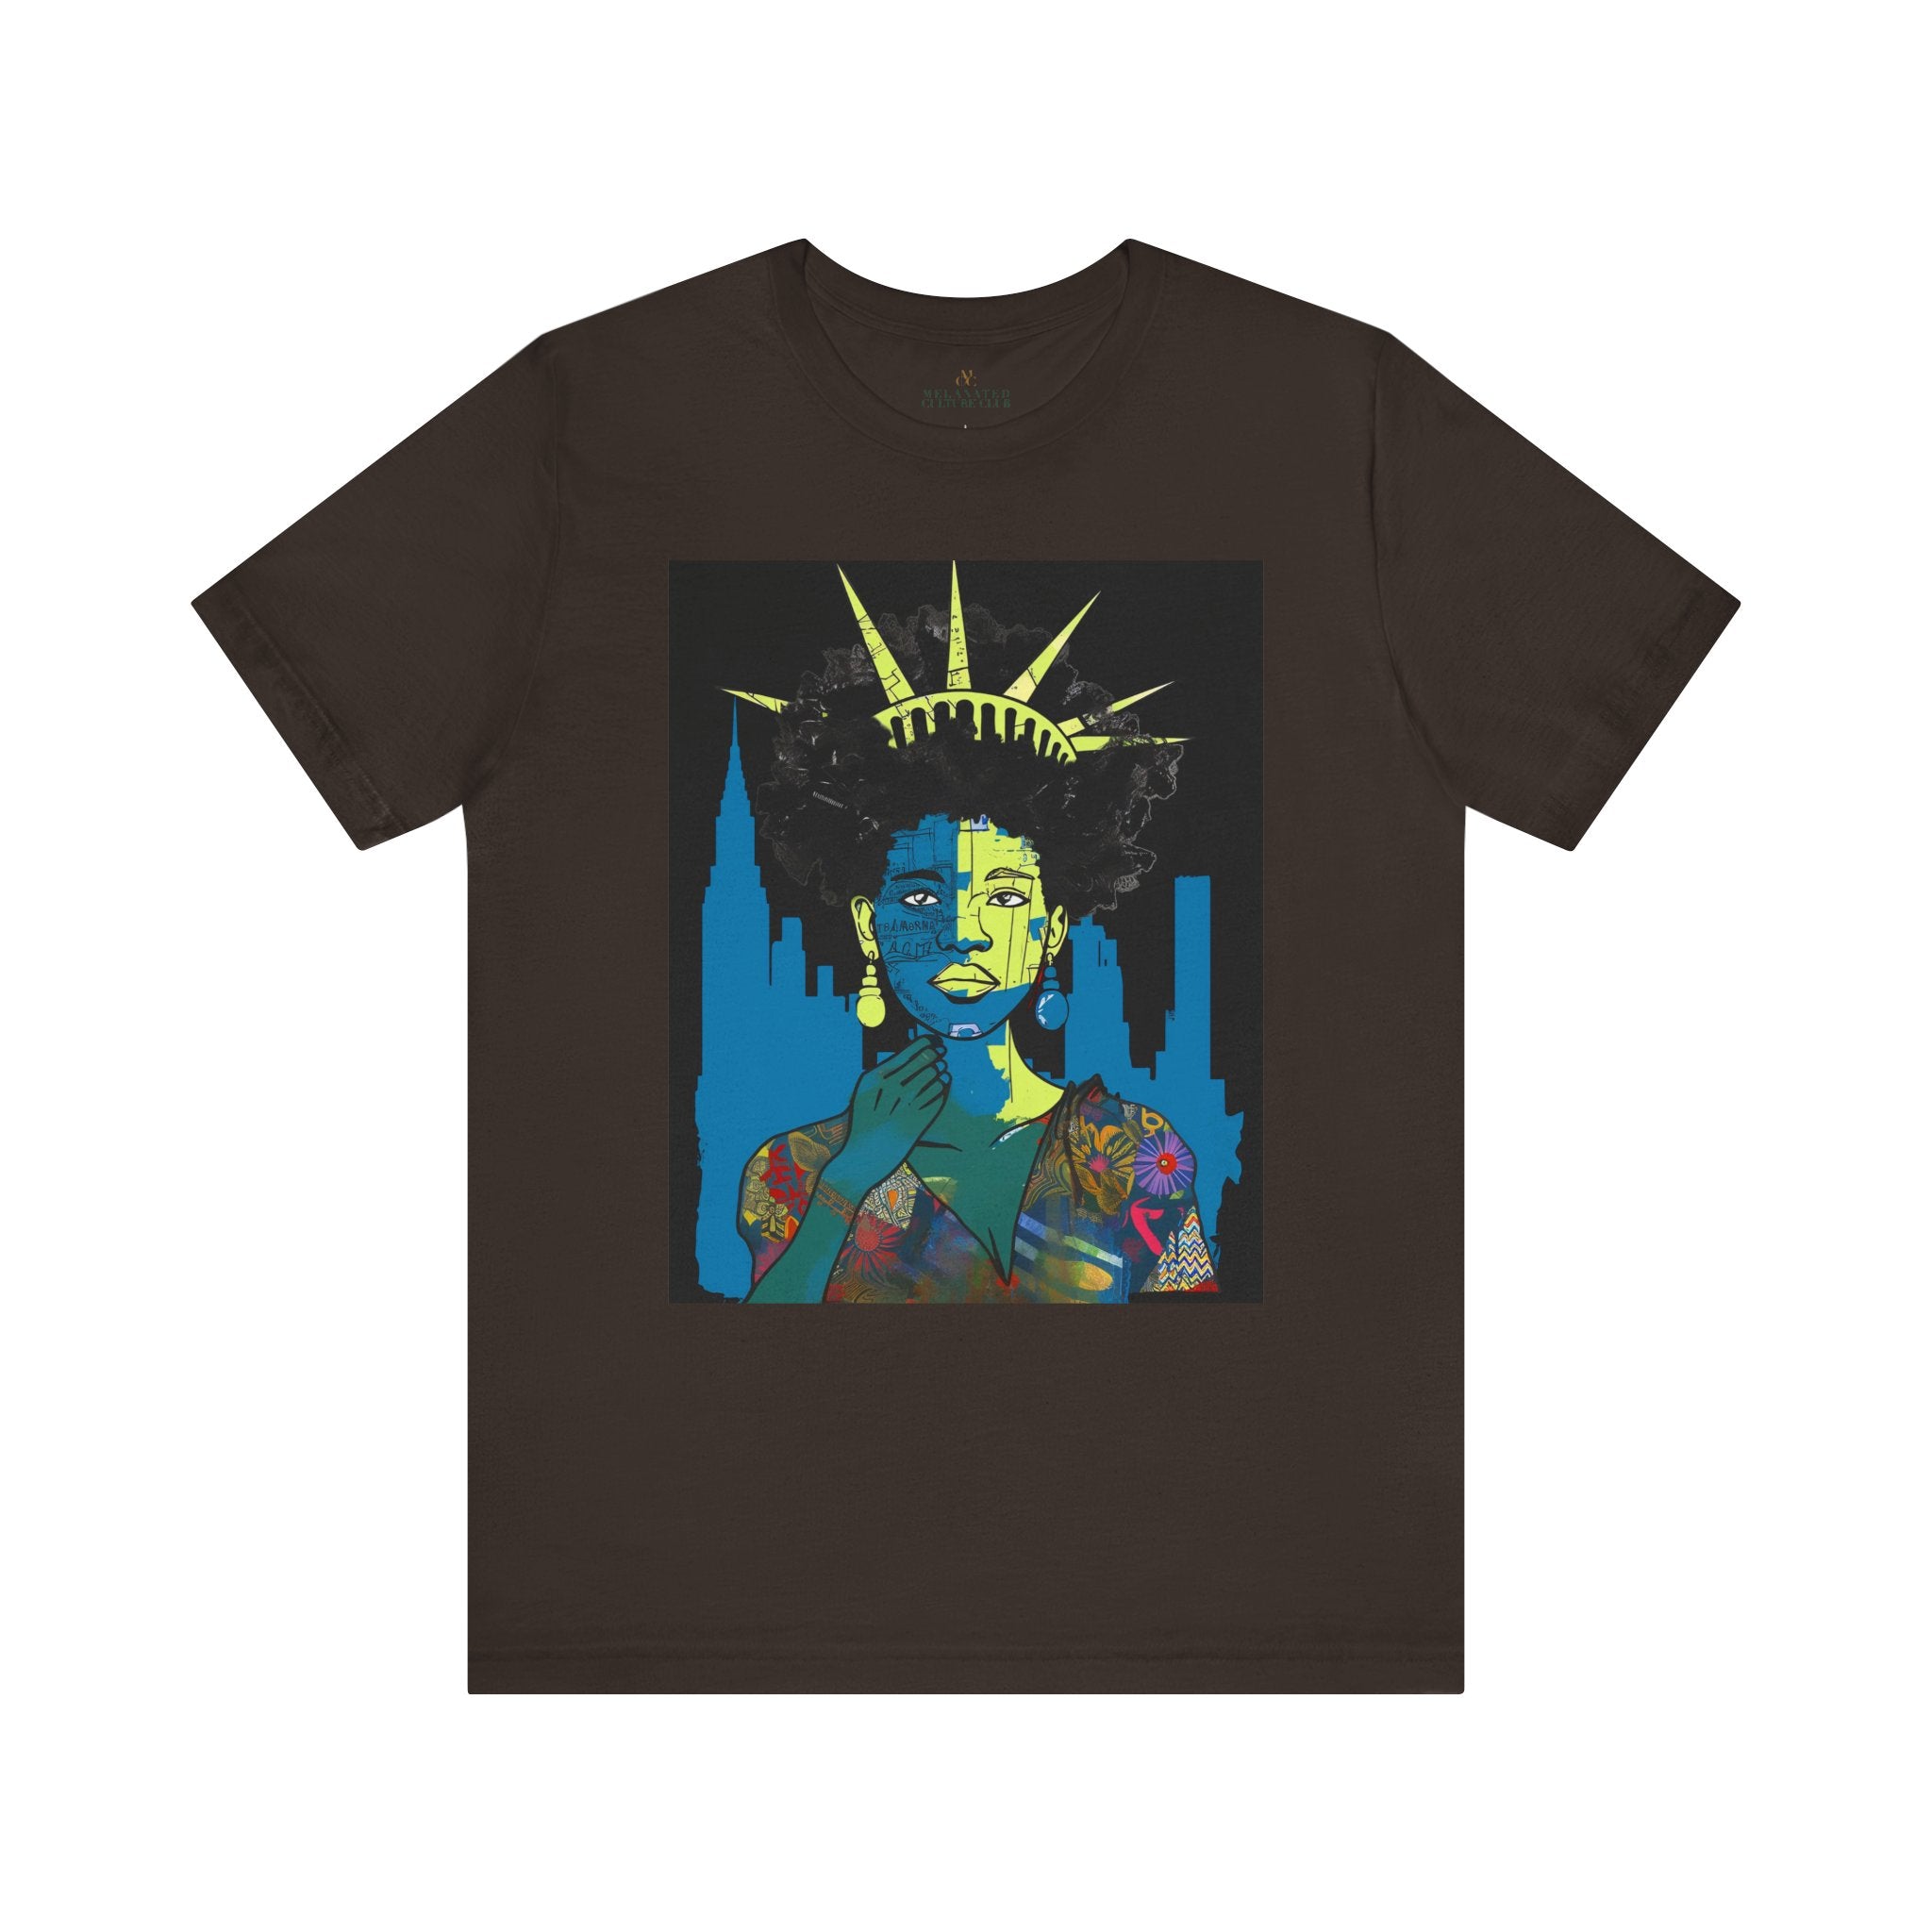 Black Woman Art Statue of Liberty Tee in brown - Style 12